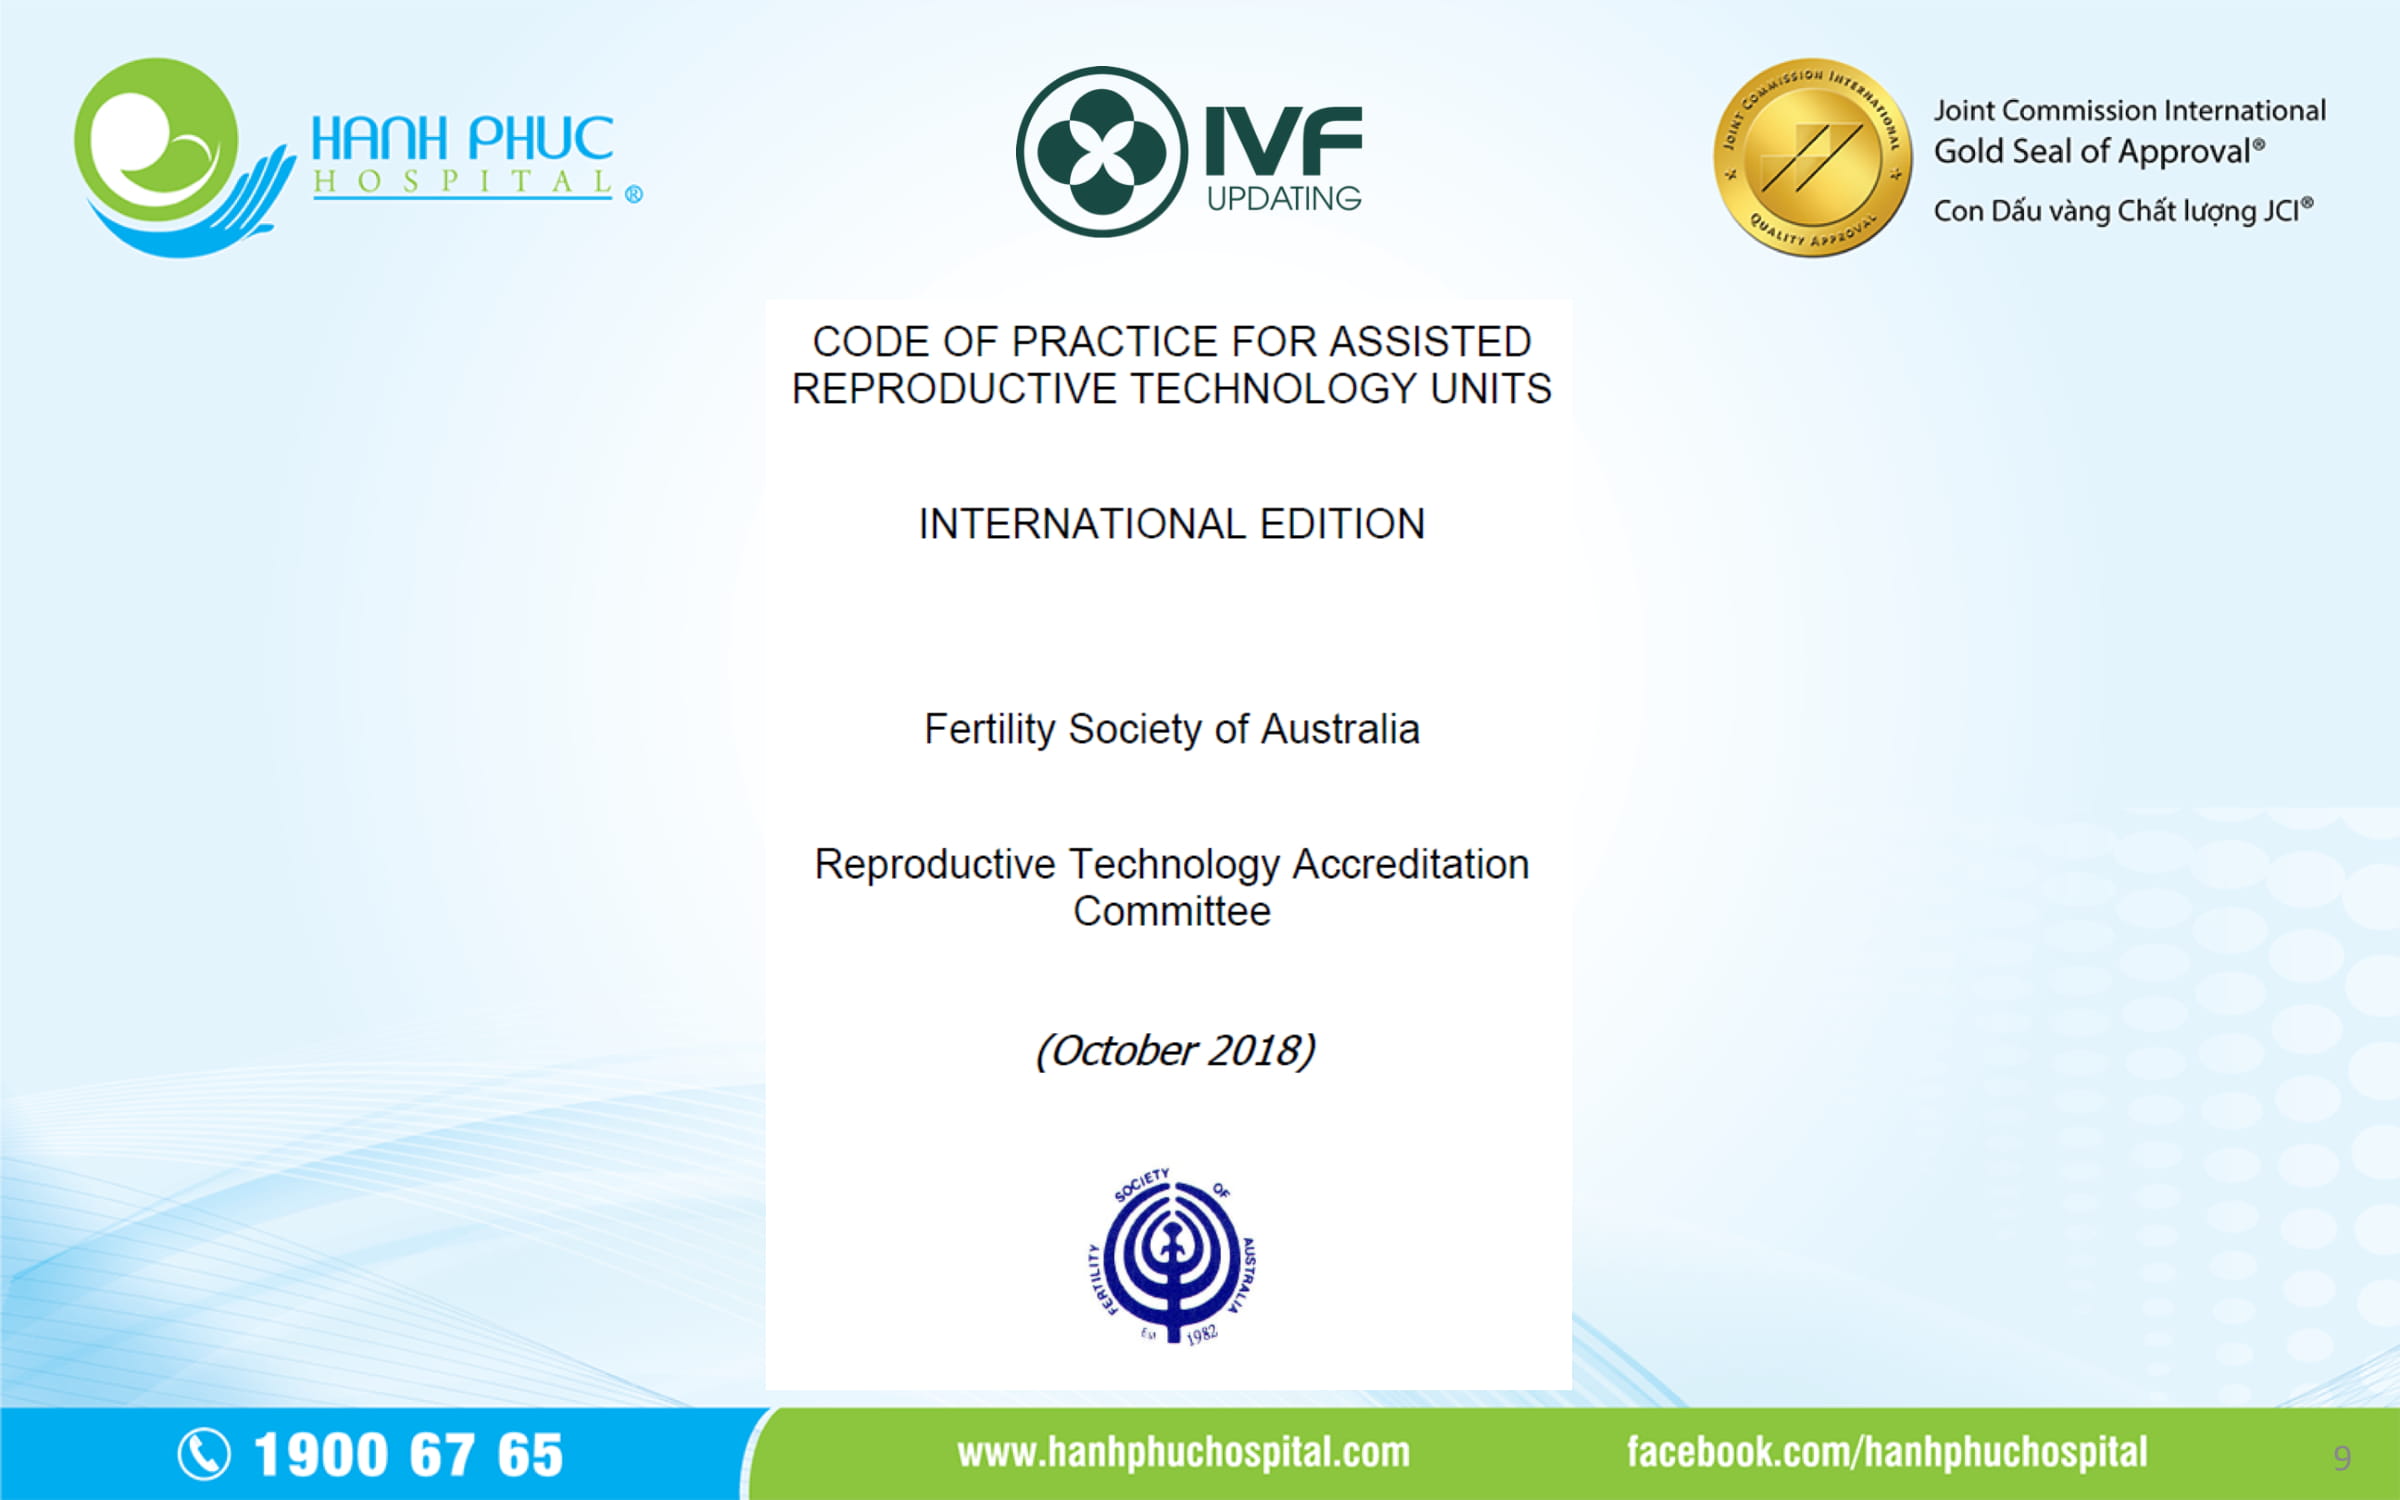 BS Vo Thien An Report_IVF UPDATING 5-09